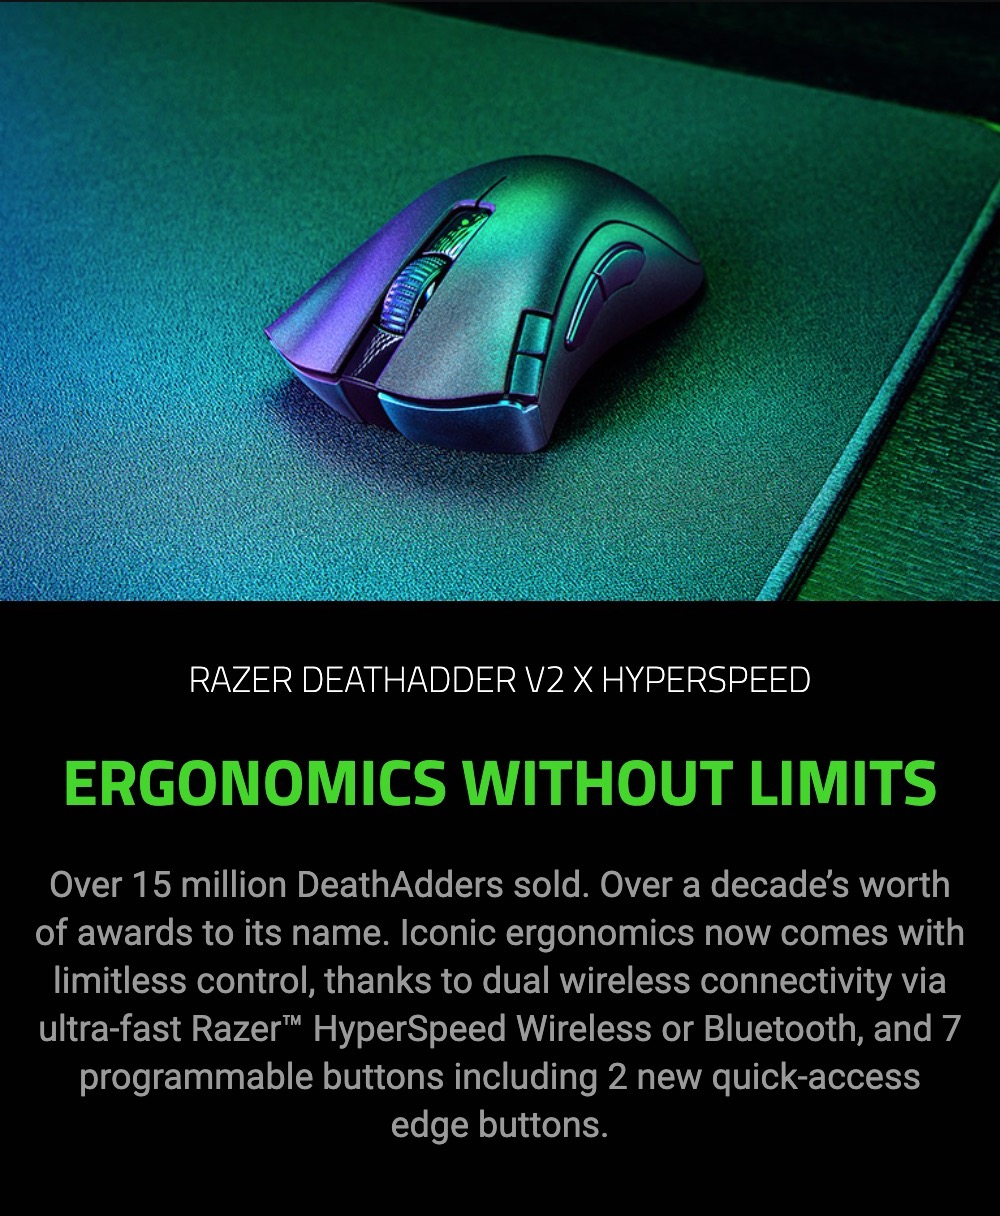 Razer-DeathAdder-V2-X-HyperSpeed-Wireless-Gaming-Mouse-with-Best-In-Class-Ergonomics-Product-Description-1